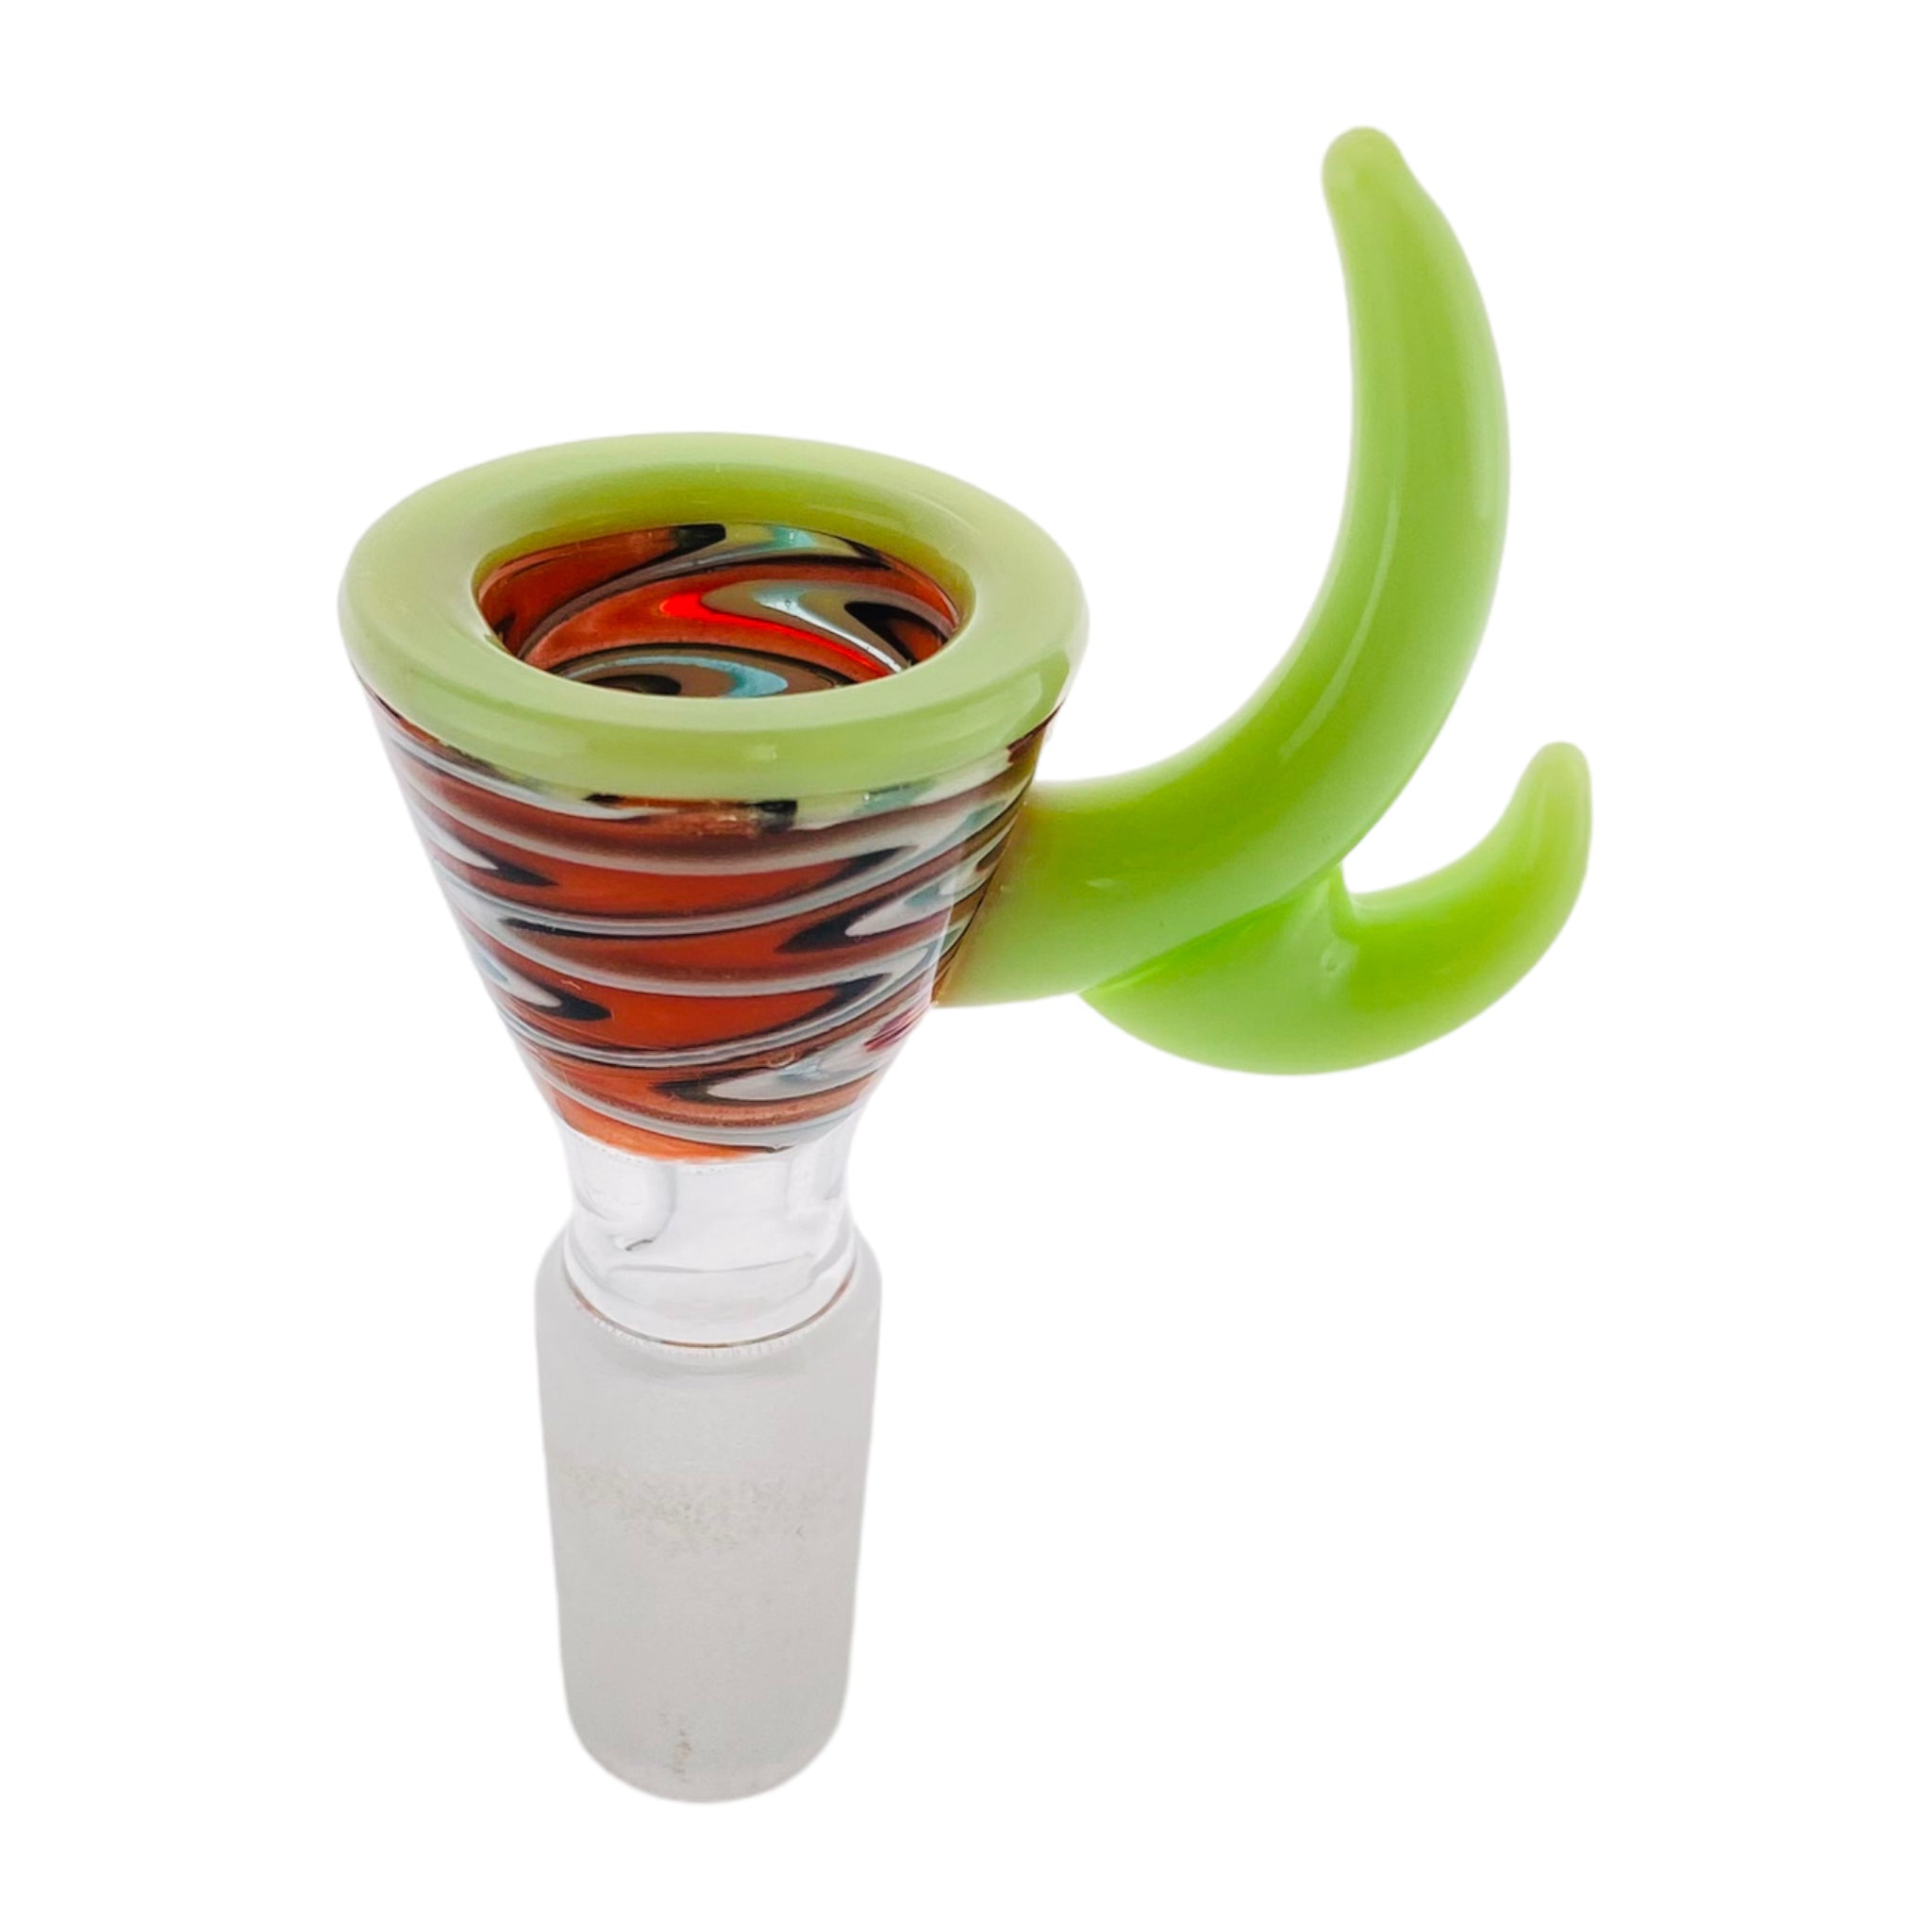 14mm Flower Bowl - Fire and Ice Wig Wag Bong Bowl Piece With Green Horn Handle